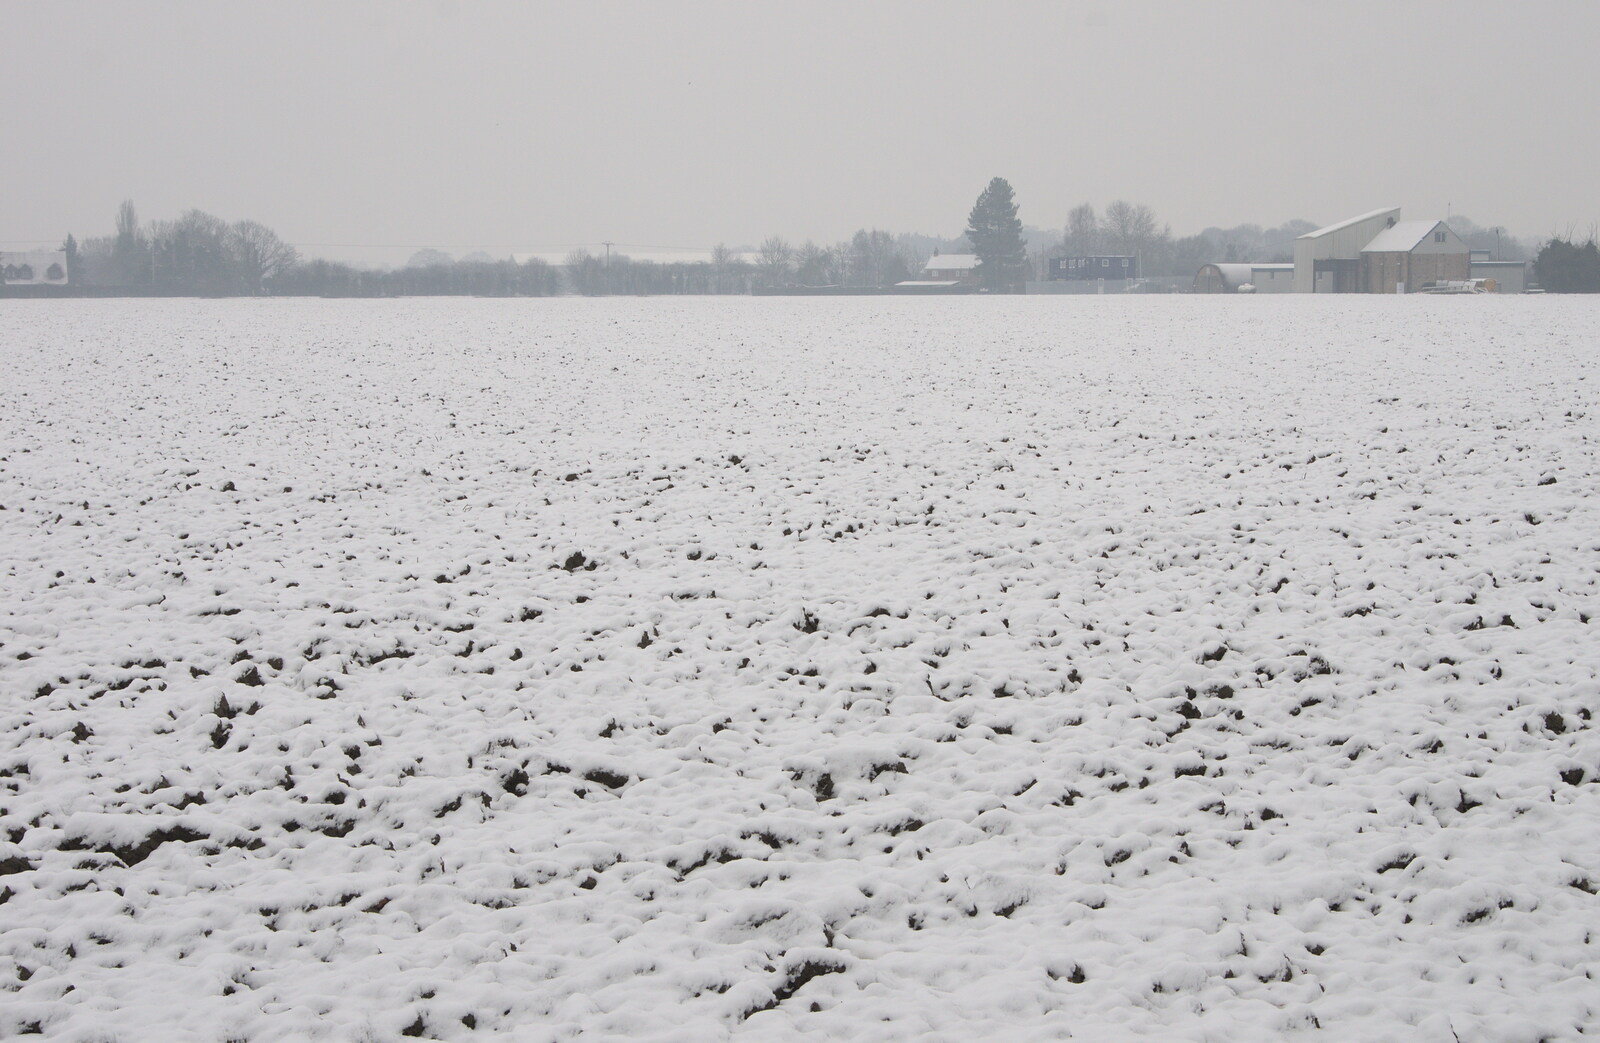 The back field from A Snowy Day, Brome, Suffolk - 12th February 2017